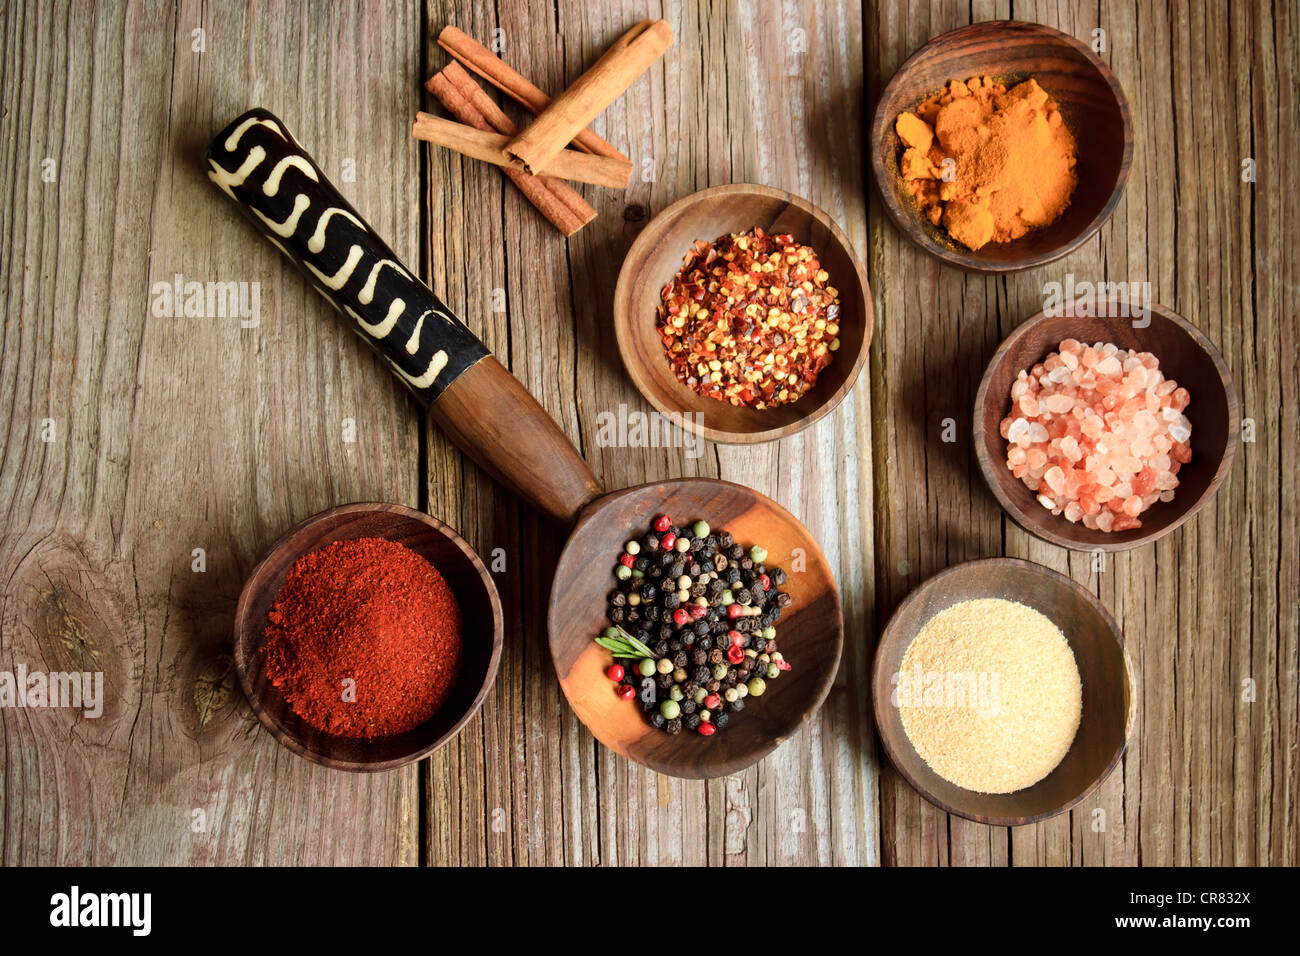 Collection of spices in wooden bowls Stock Photo